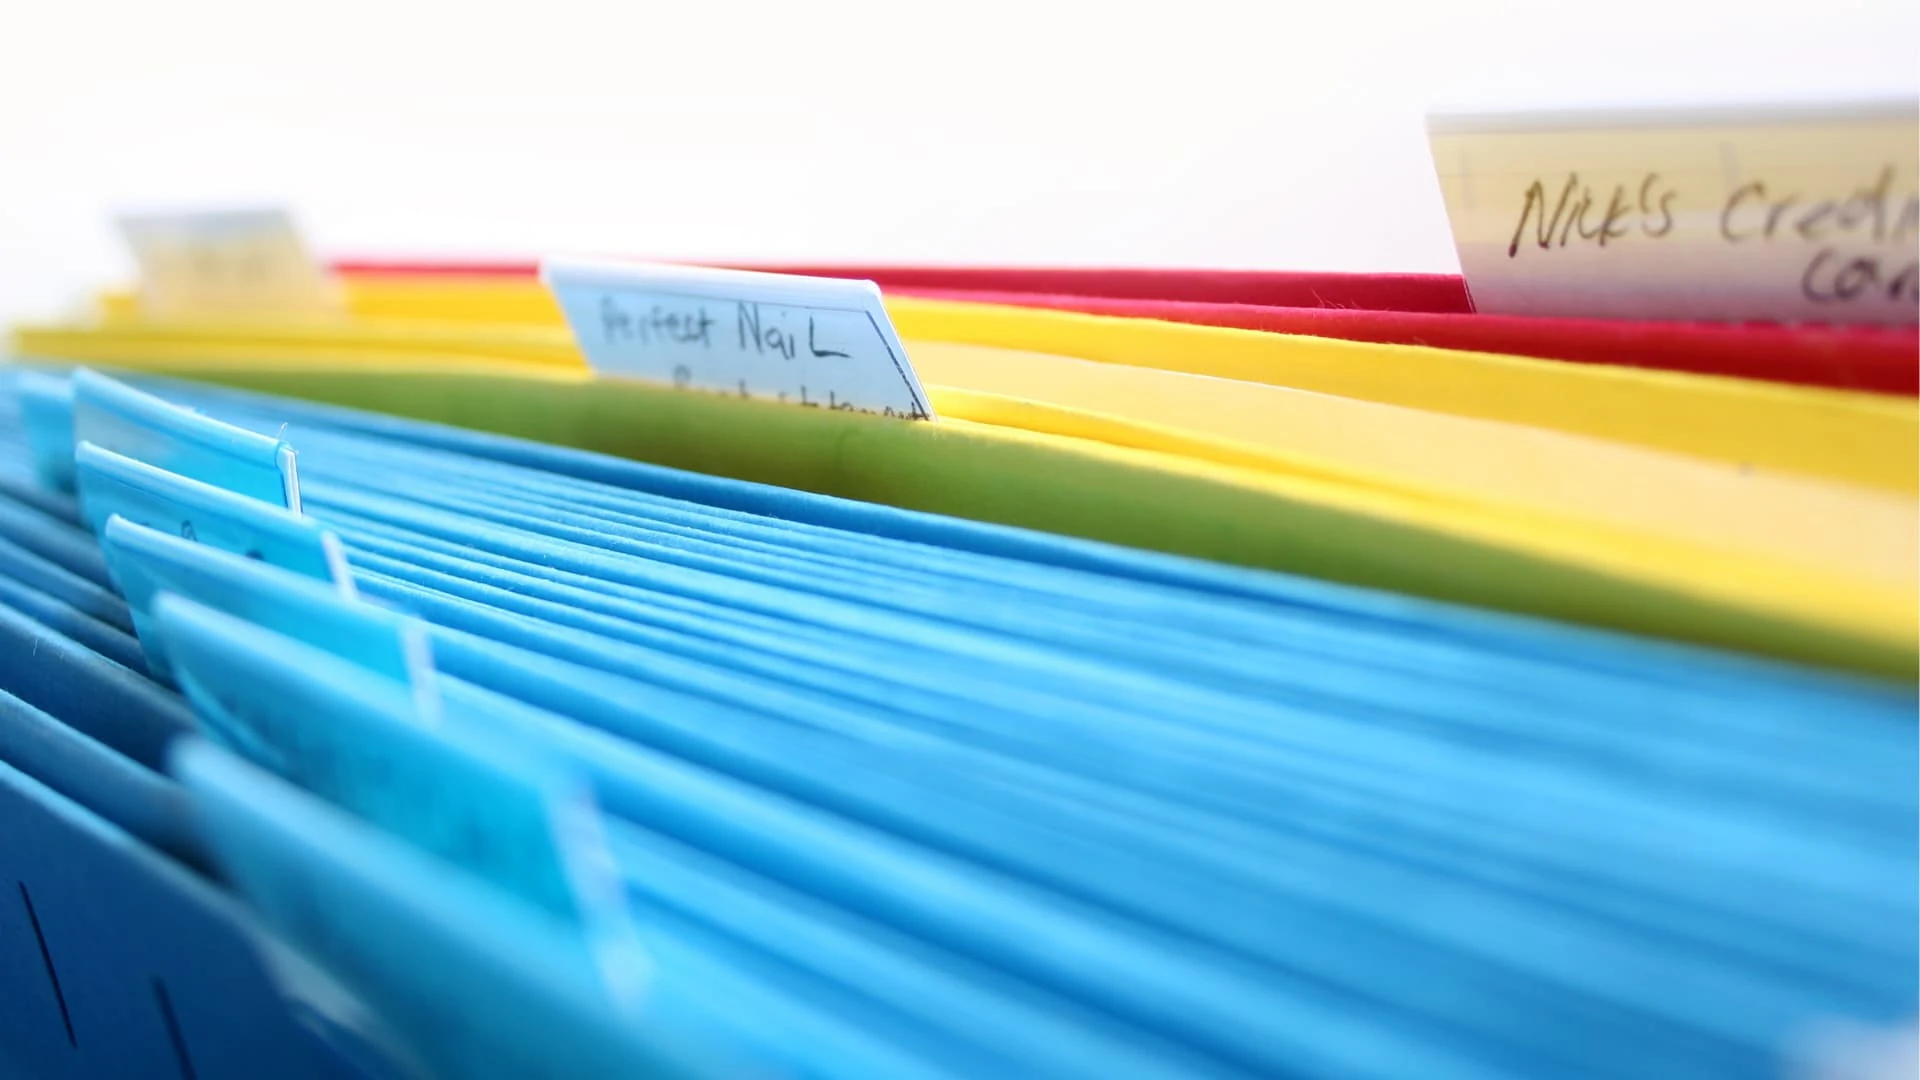 How To Organize Important Papers And Bills In 6 Steps | Organize & Declutter